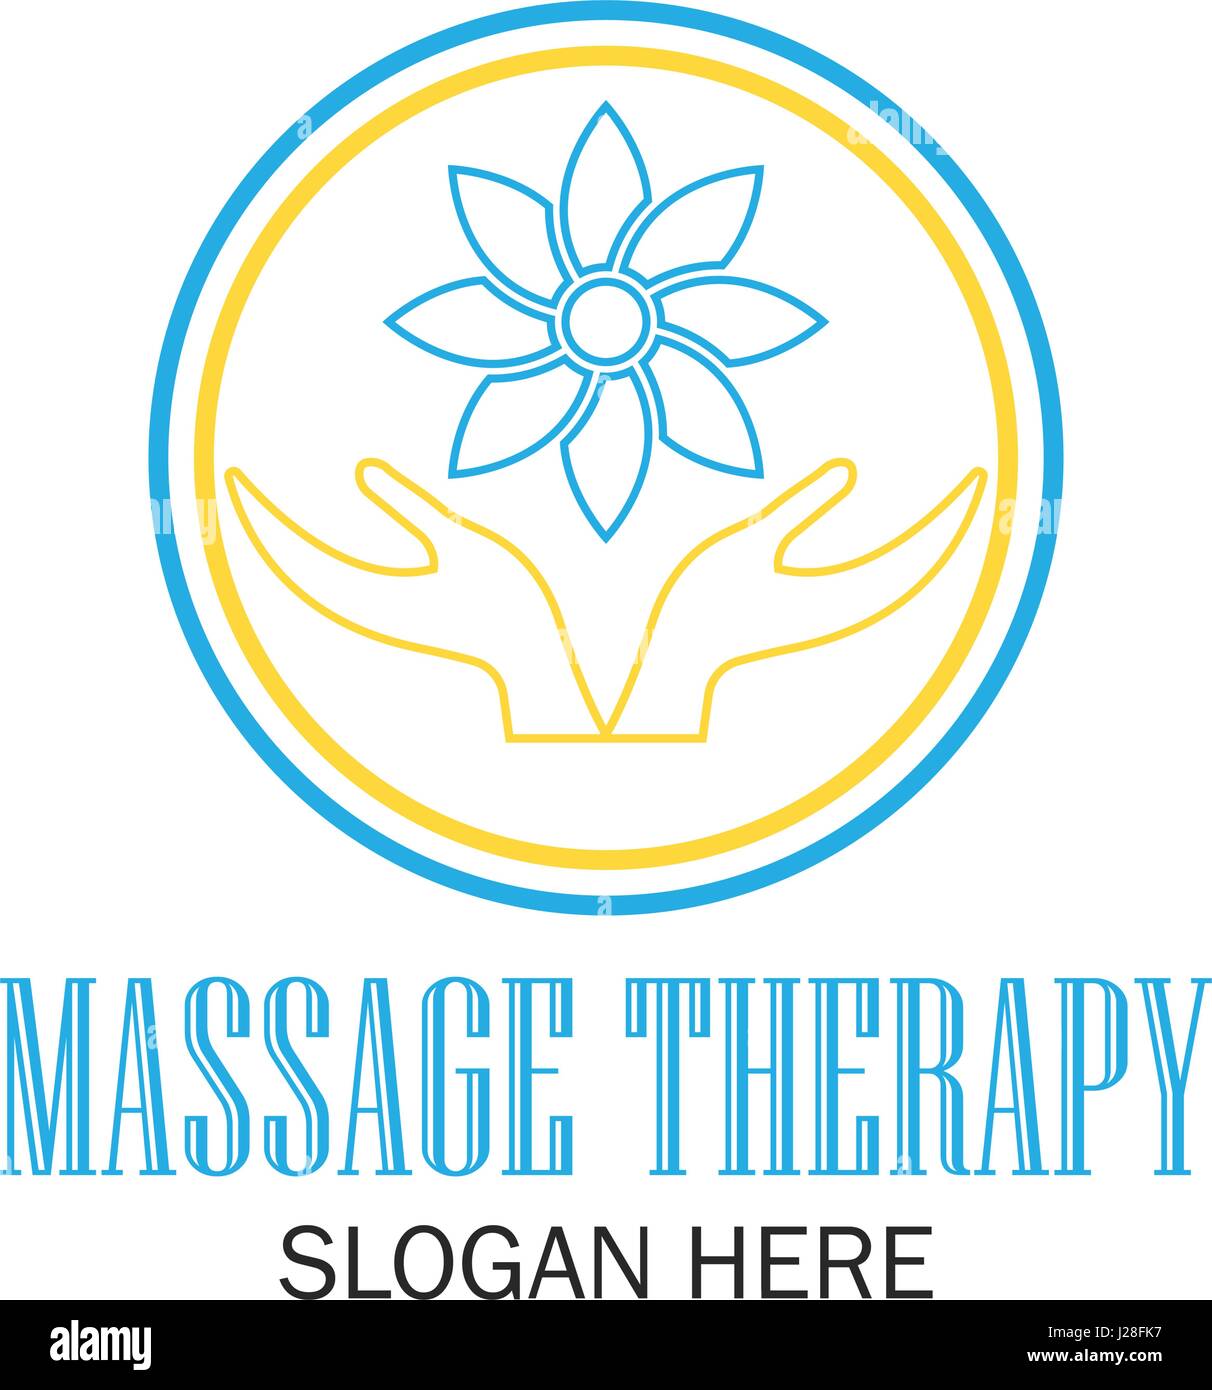 Massage Therapy Logo With Text Space For Your Slogan Tagline